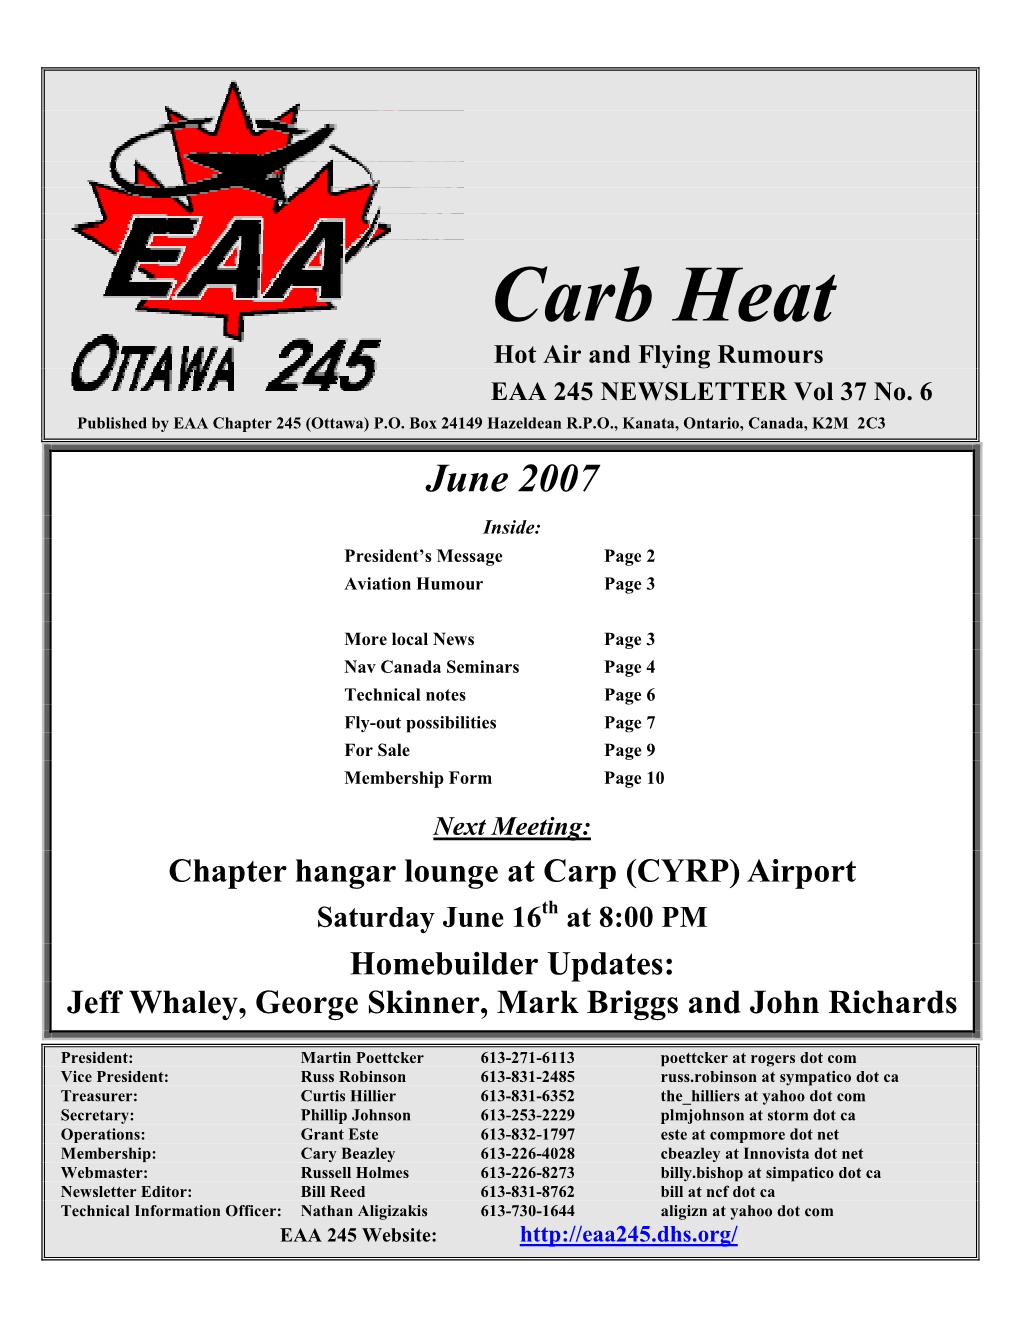 Carb Heat Hot Air and Flying Rumours EAA 245 NEWSLETTER Vol 37 No